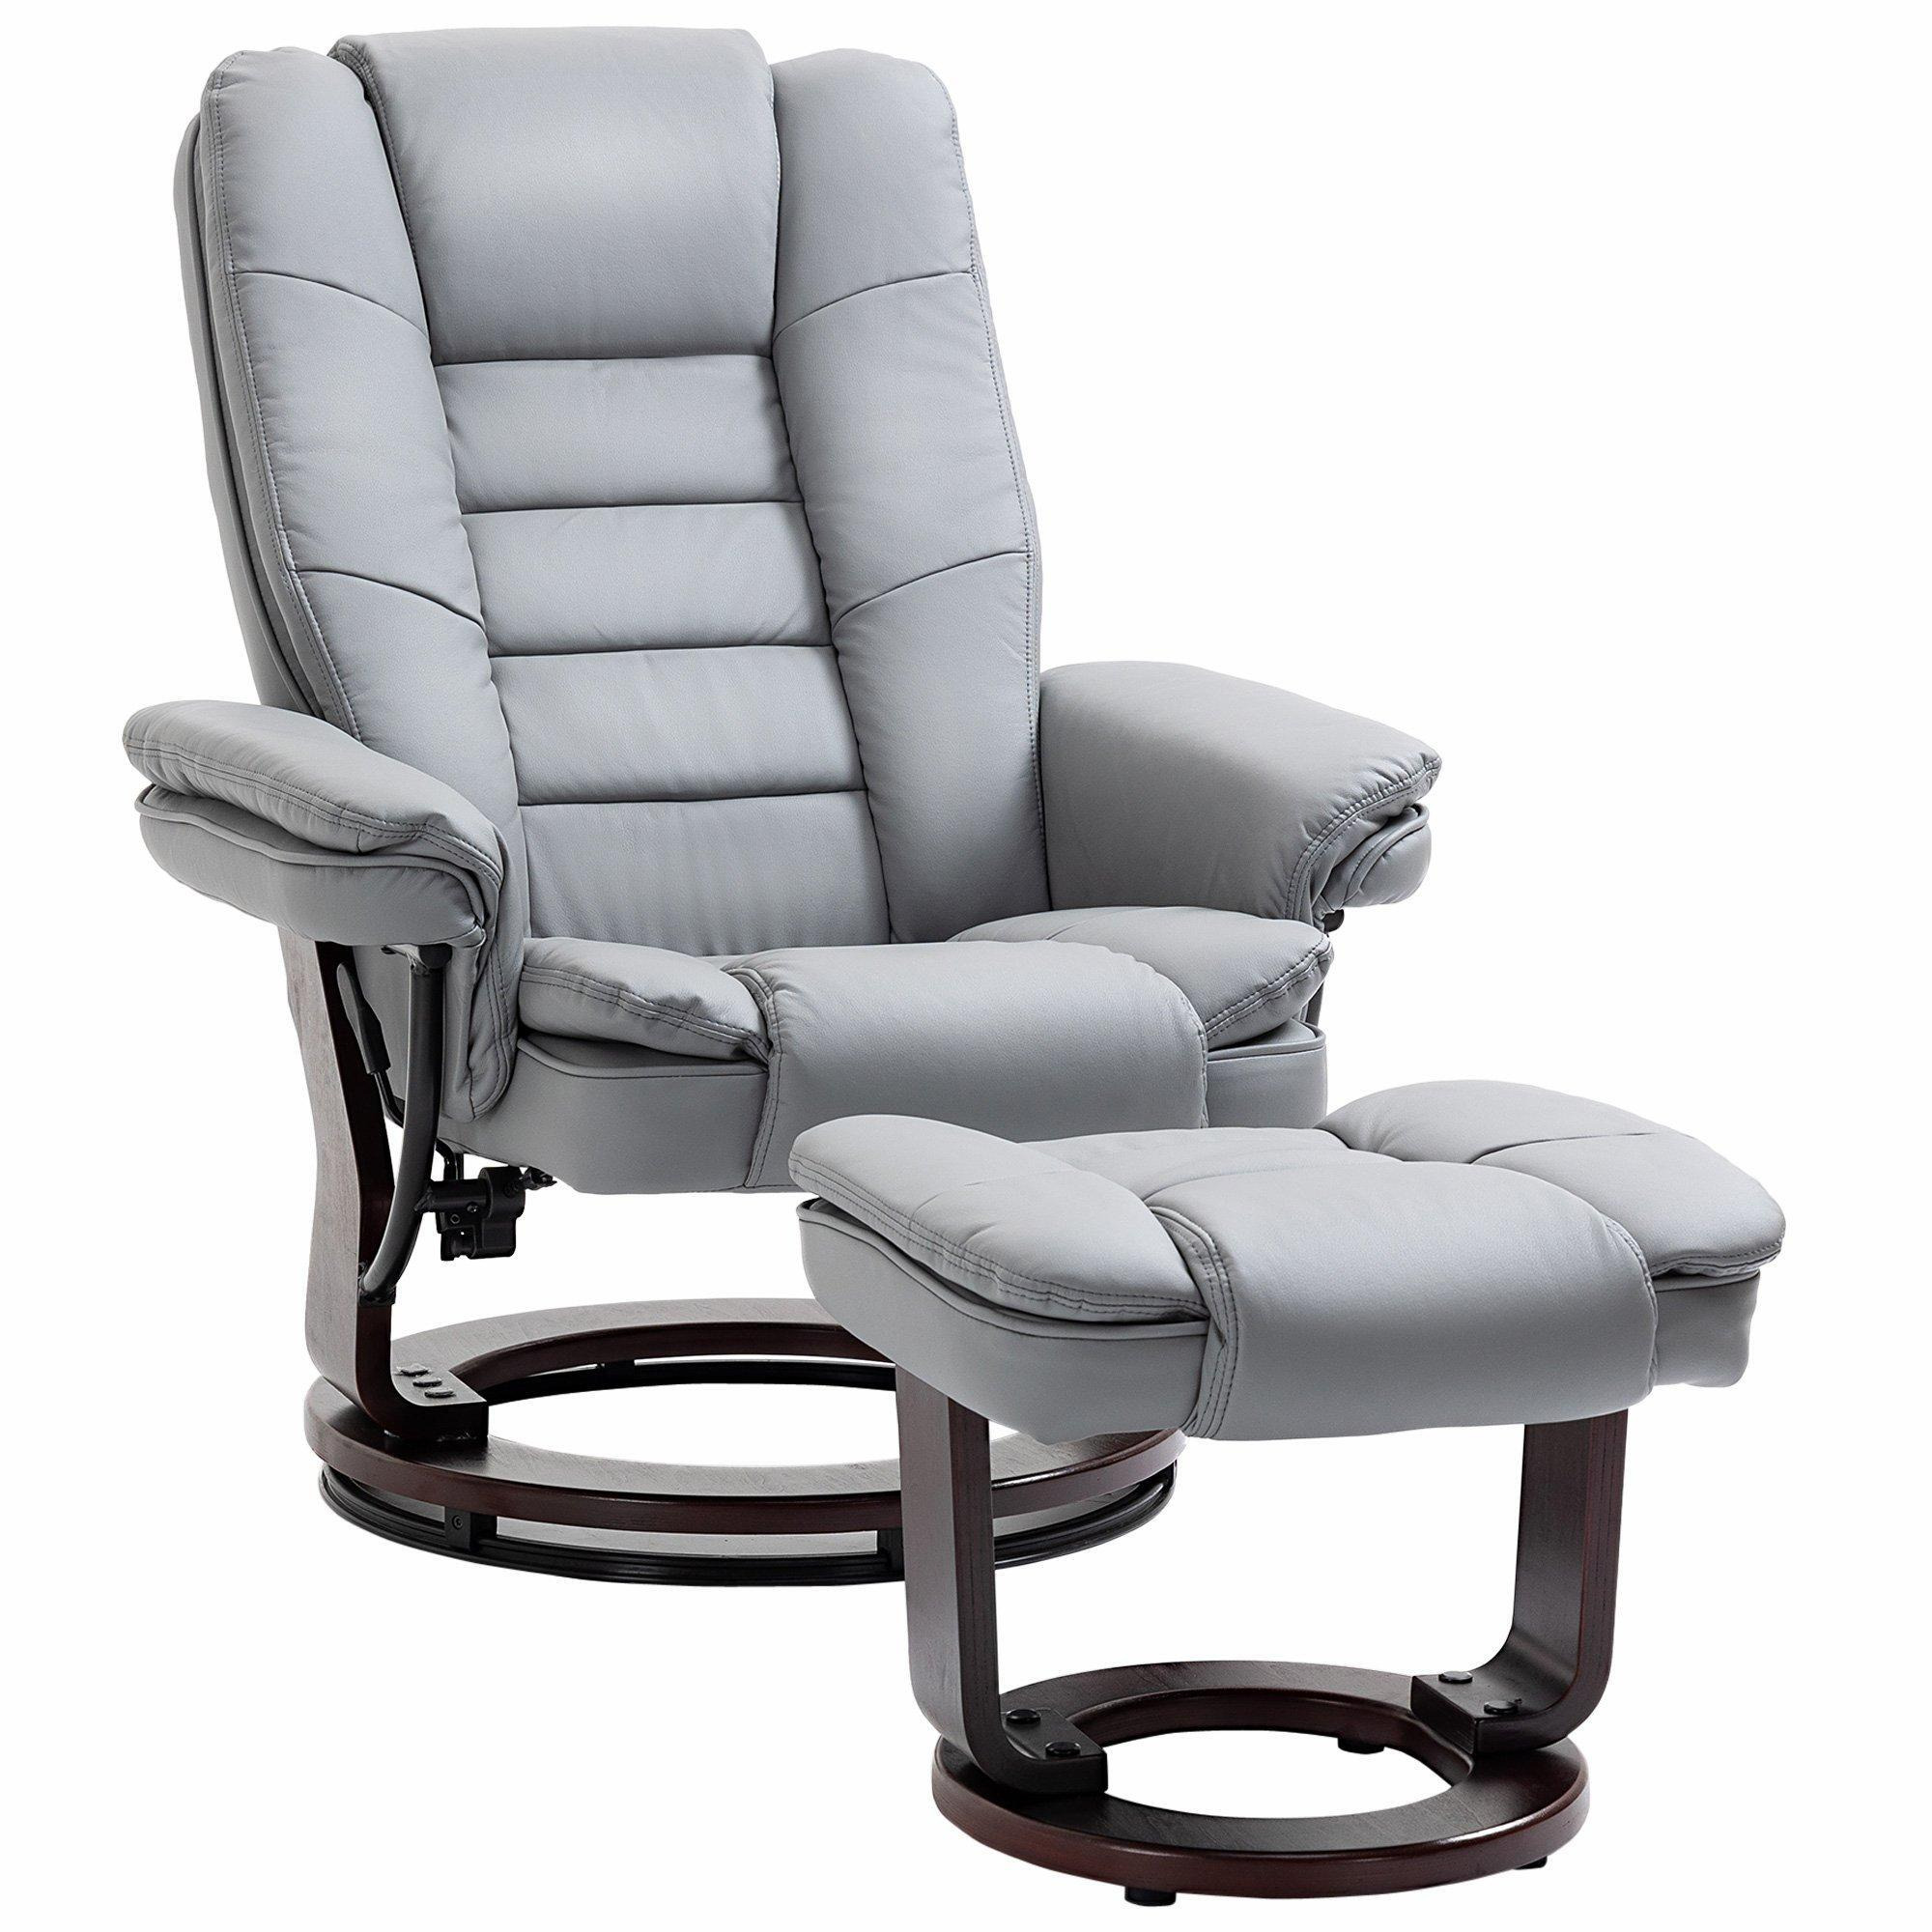 Swivel Manual Recliner and Footrest Set PU Lounge Chair Wood Base - image 1